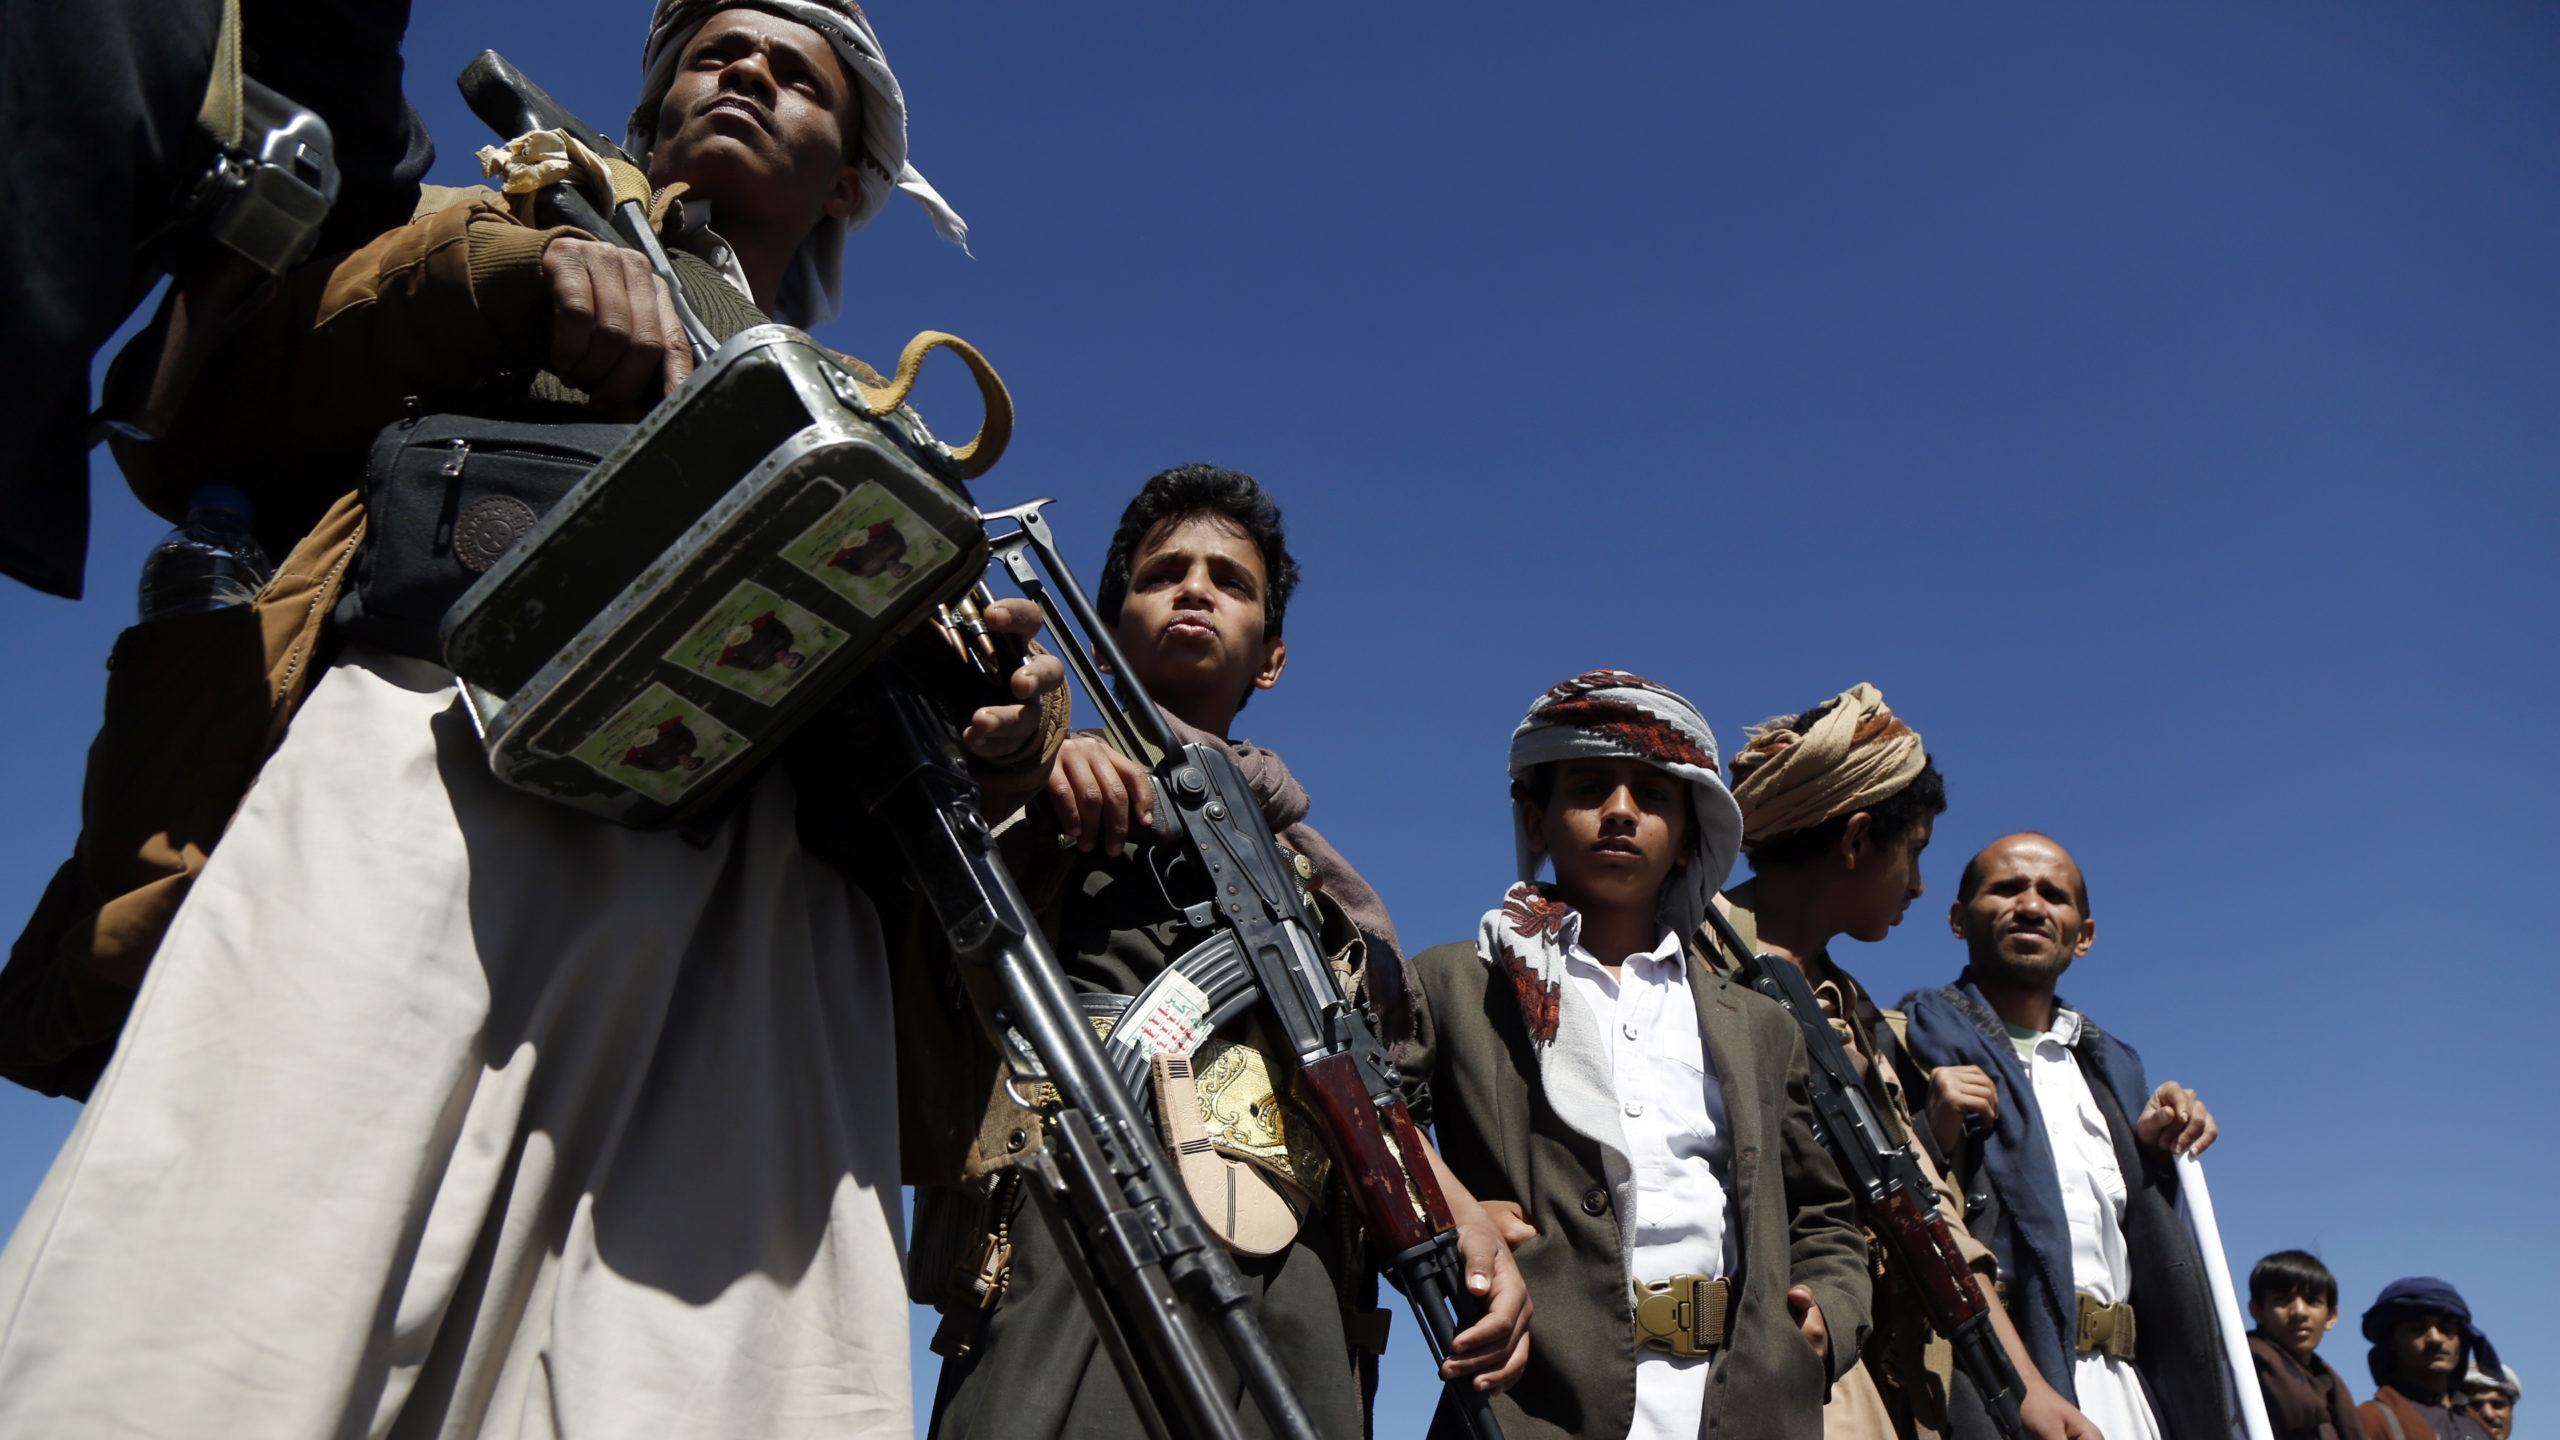 2,000 Children Recruited To Fight for Houthis Killed Over 18 Months, UN Says